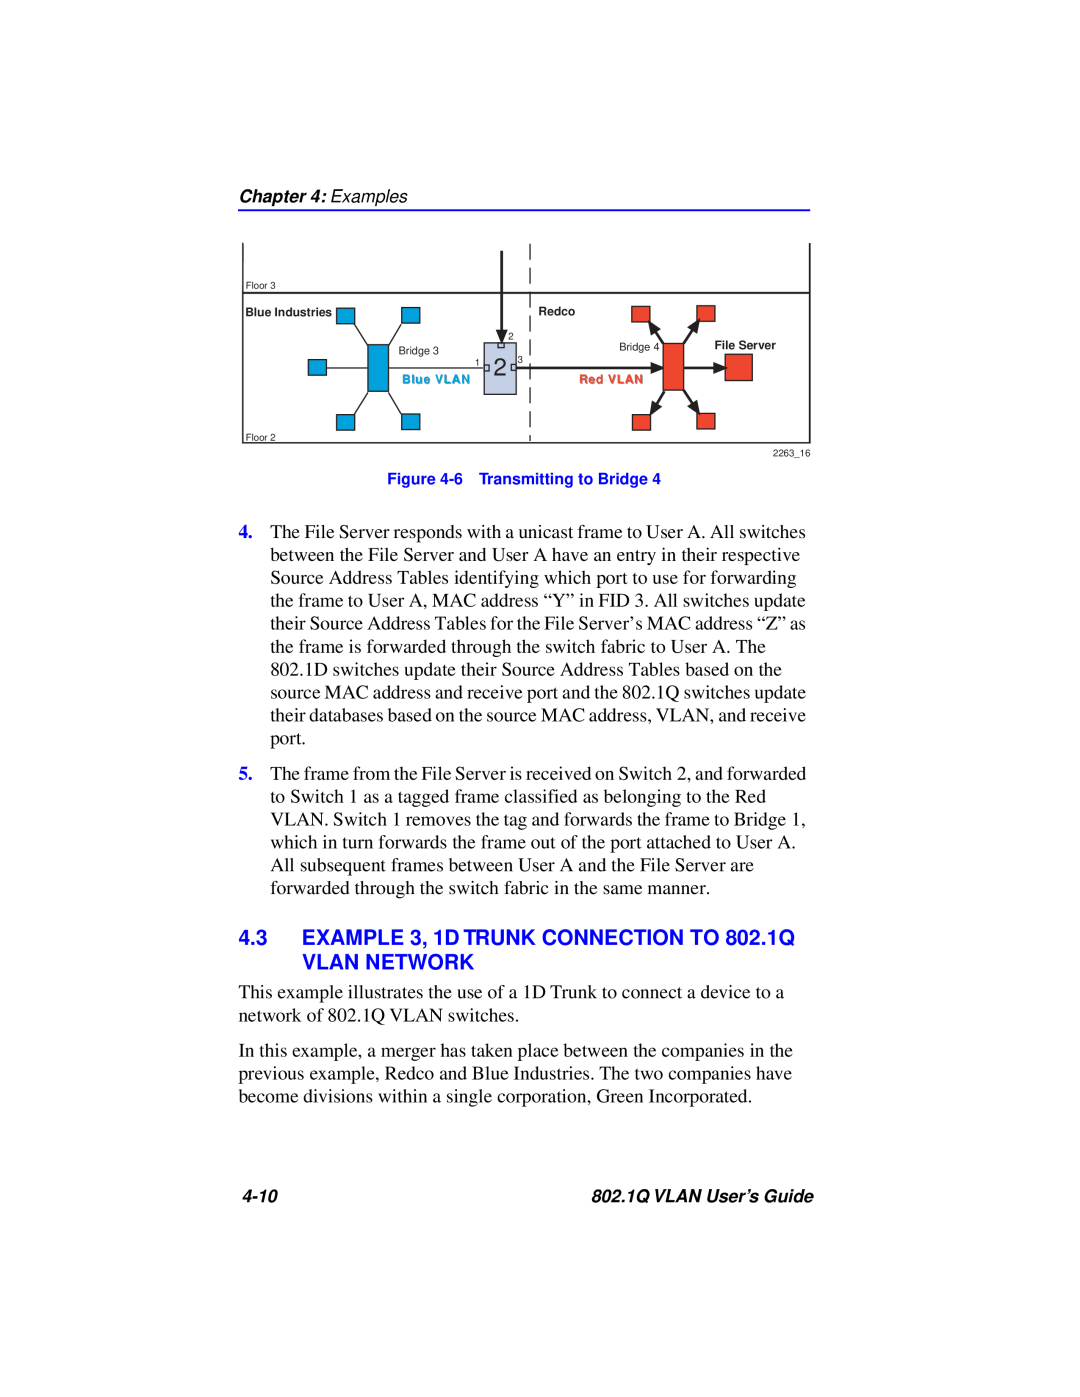 Cabletron Systems manual EXAMPLE 3, 1D TRUNK CONNECTION TO 802.1Q VLAN NETWORK, 6 Transmitting to Bridge 